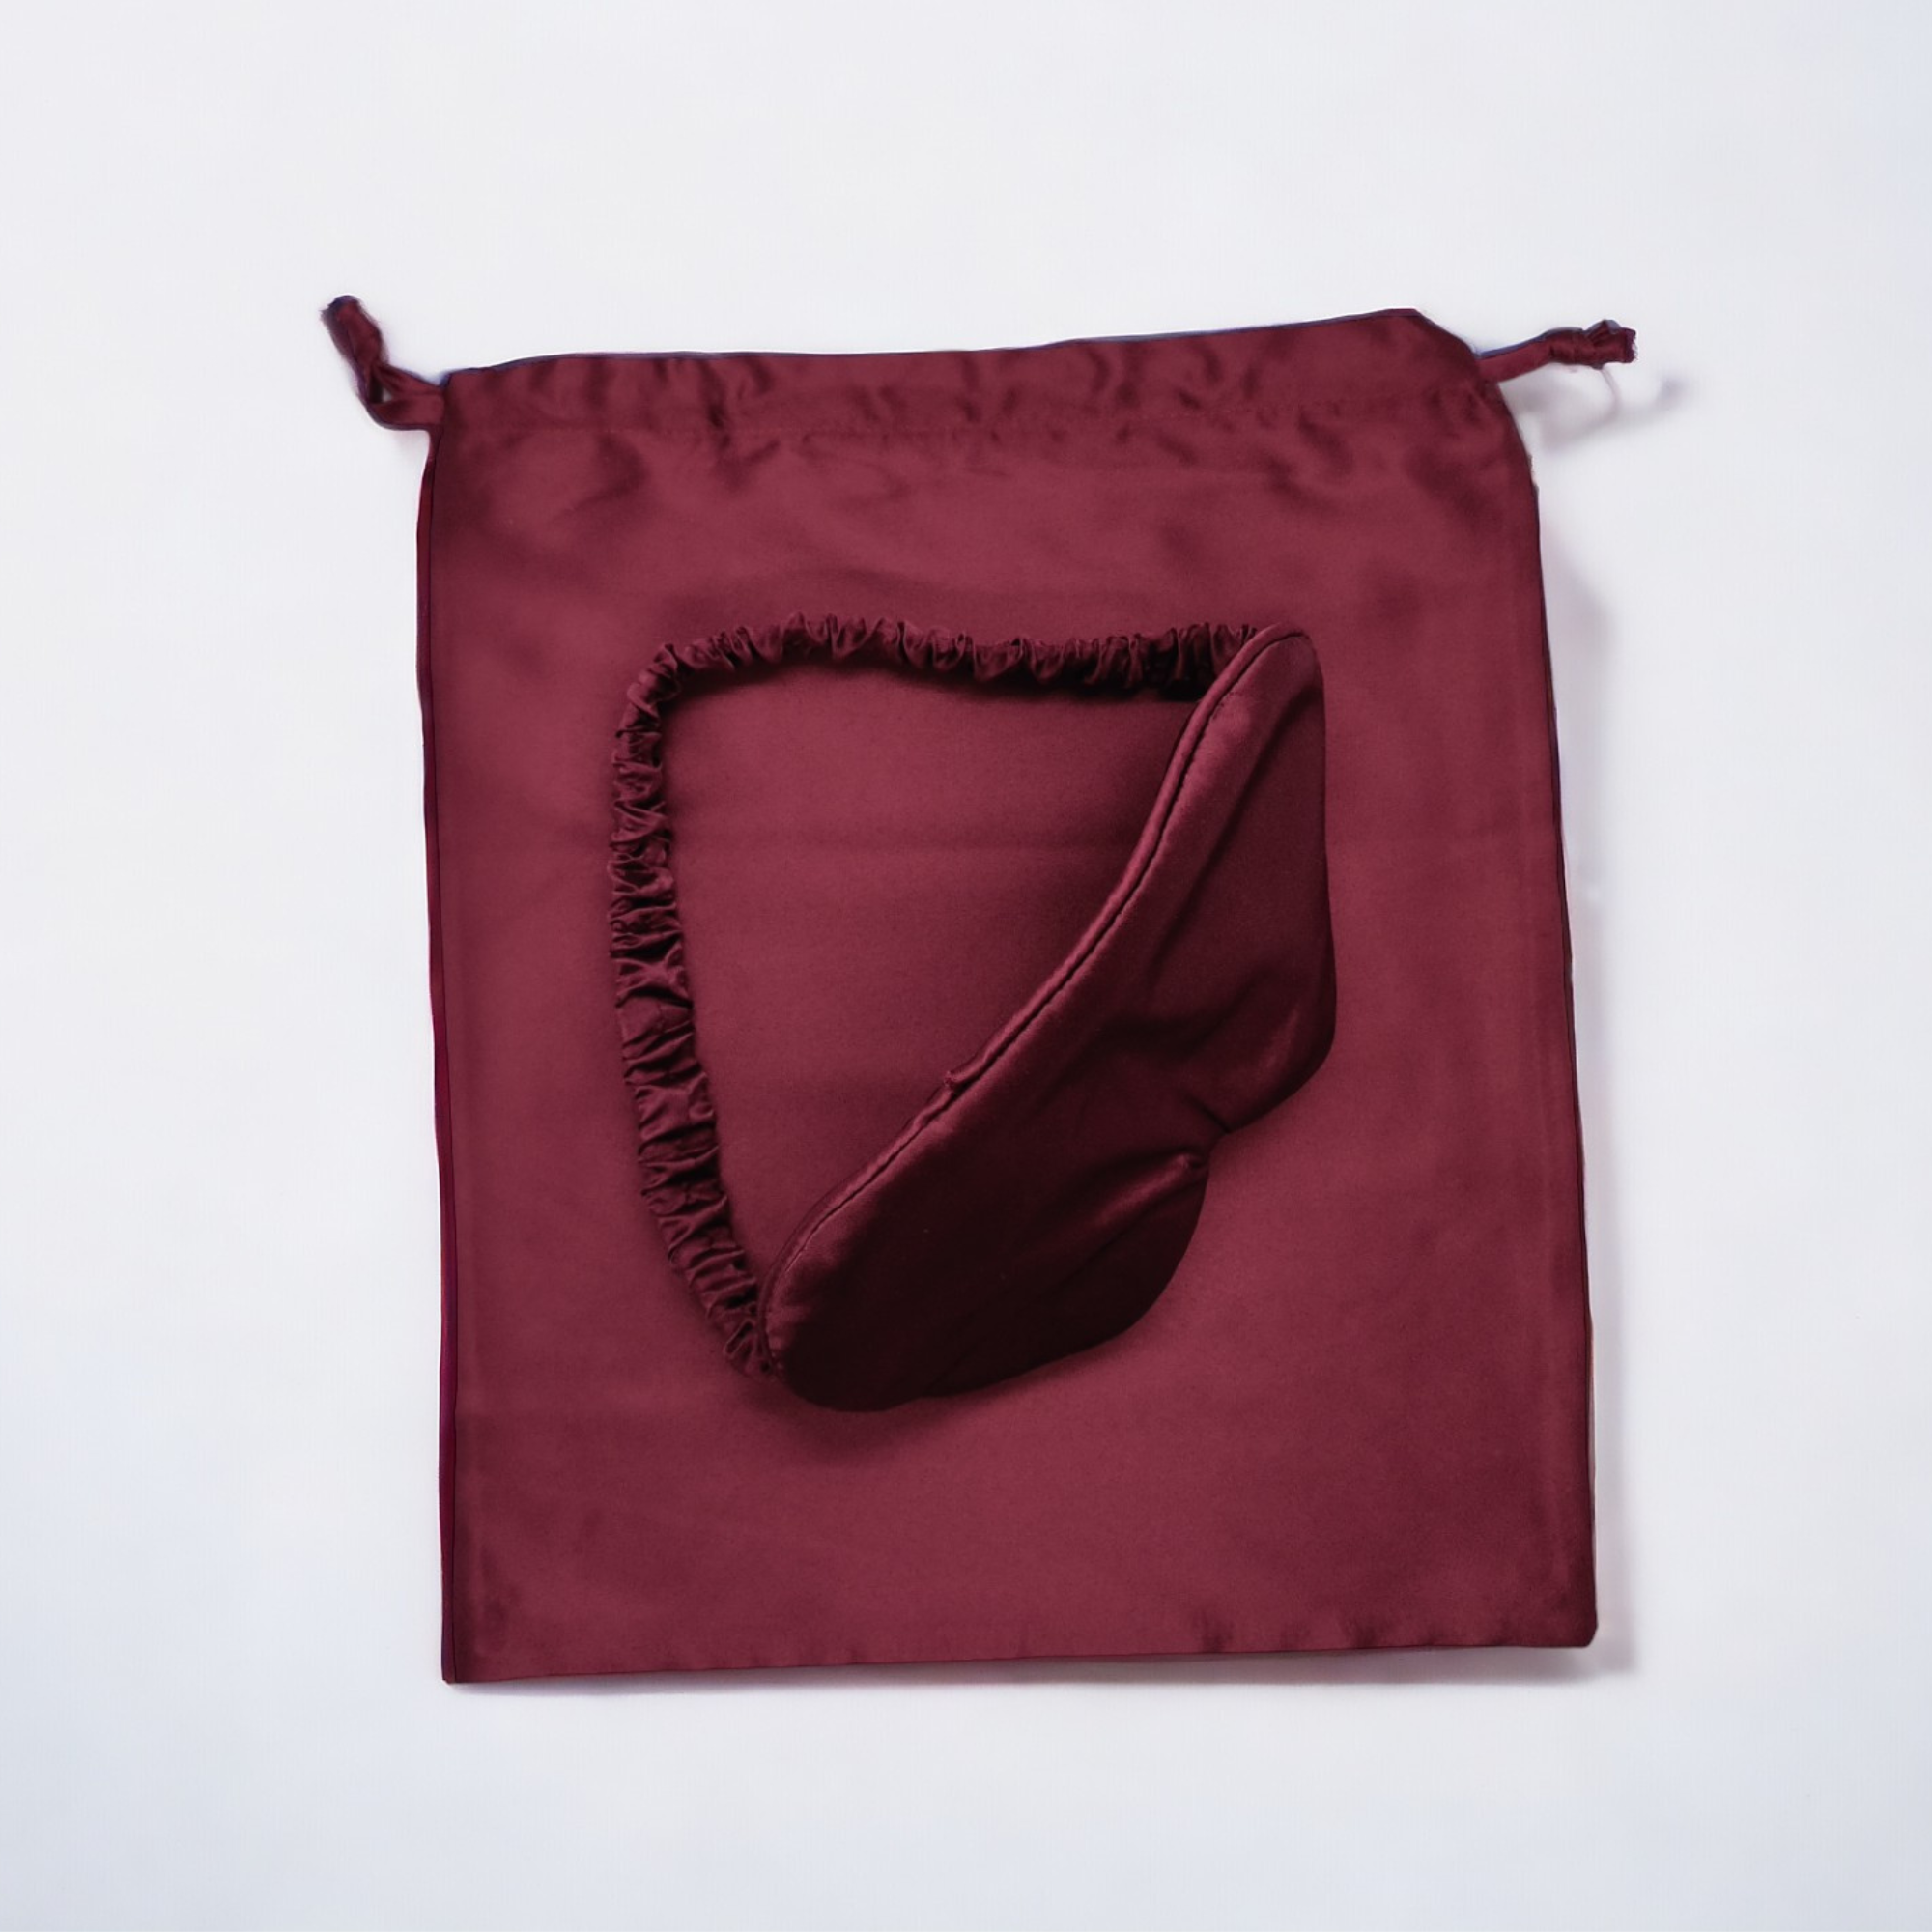 Sleeping mask - Bordeaux Red